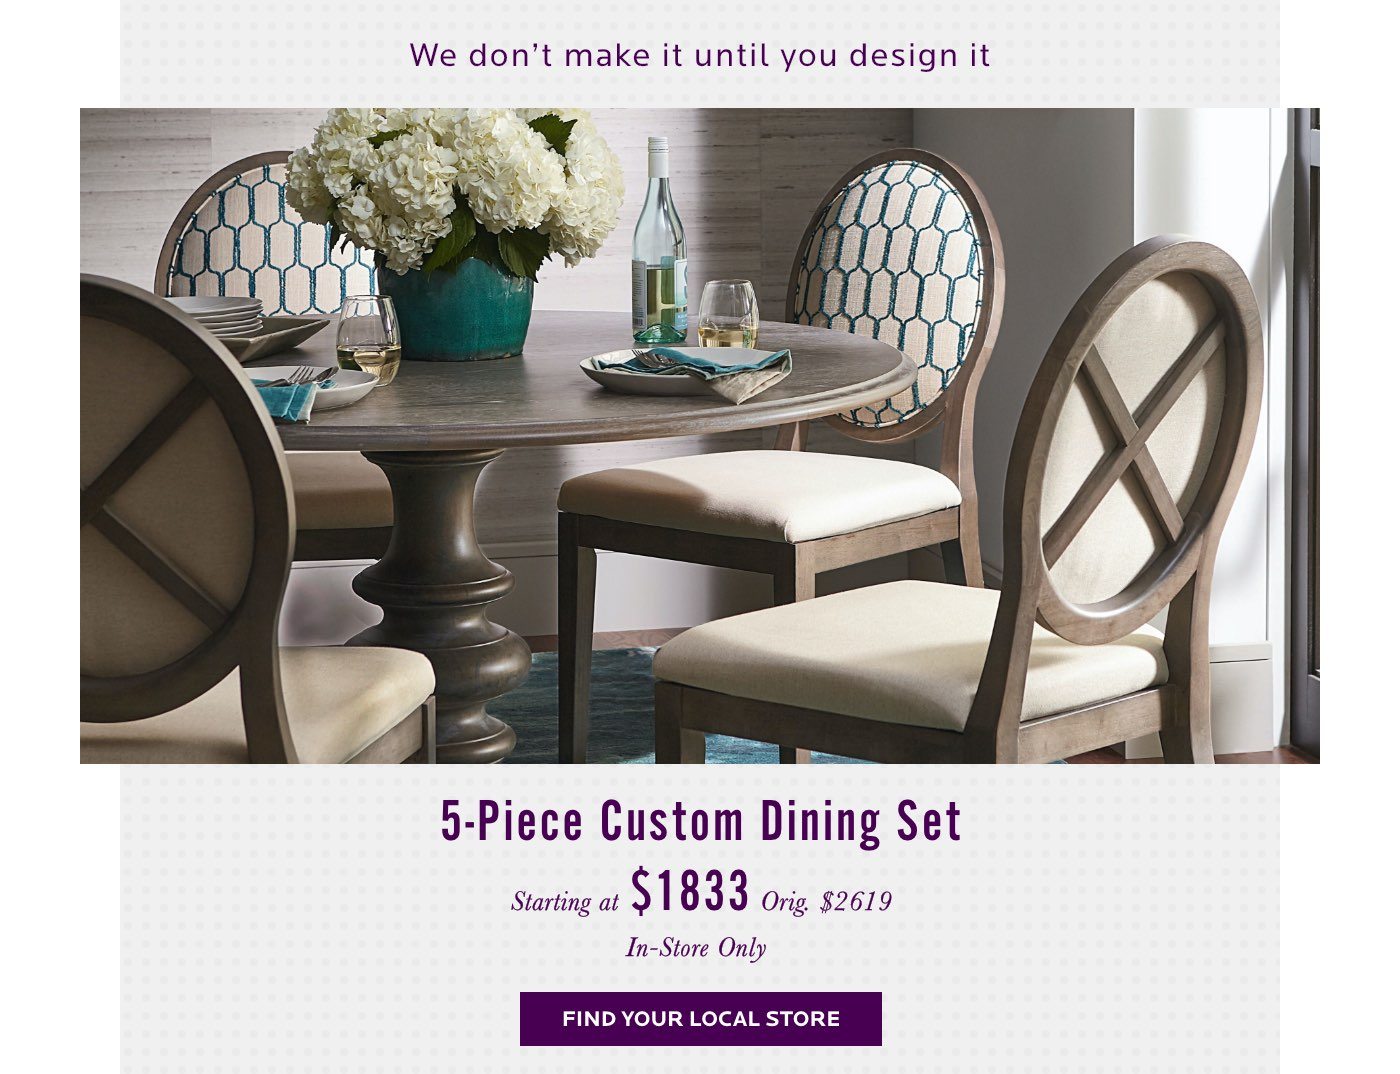 5 Piece Custom Dining Set. We don't make it until you design it. Find your local store.